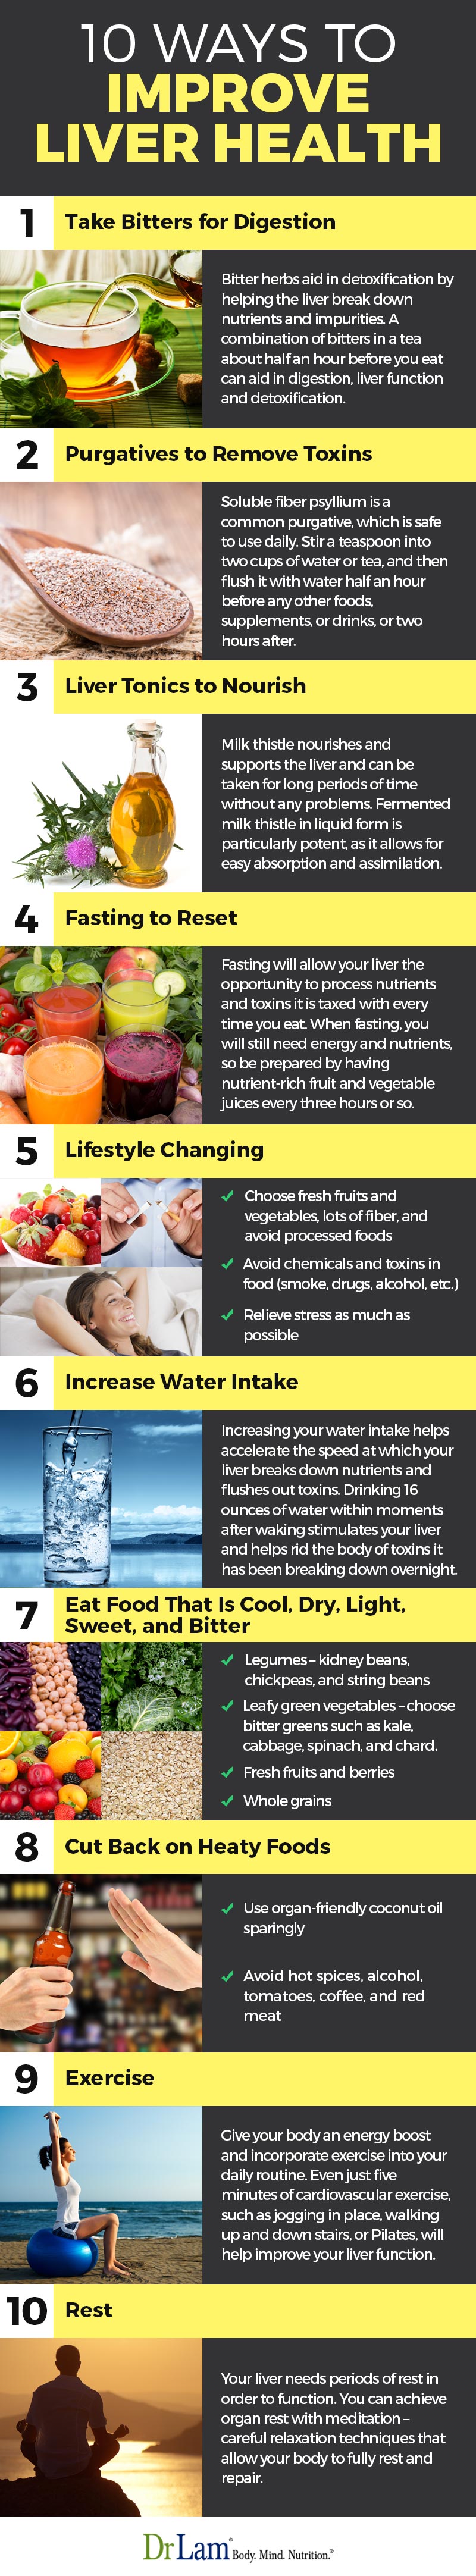 Check out this easy to understand infographic about the 10 ways to improve liver health